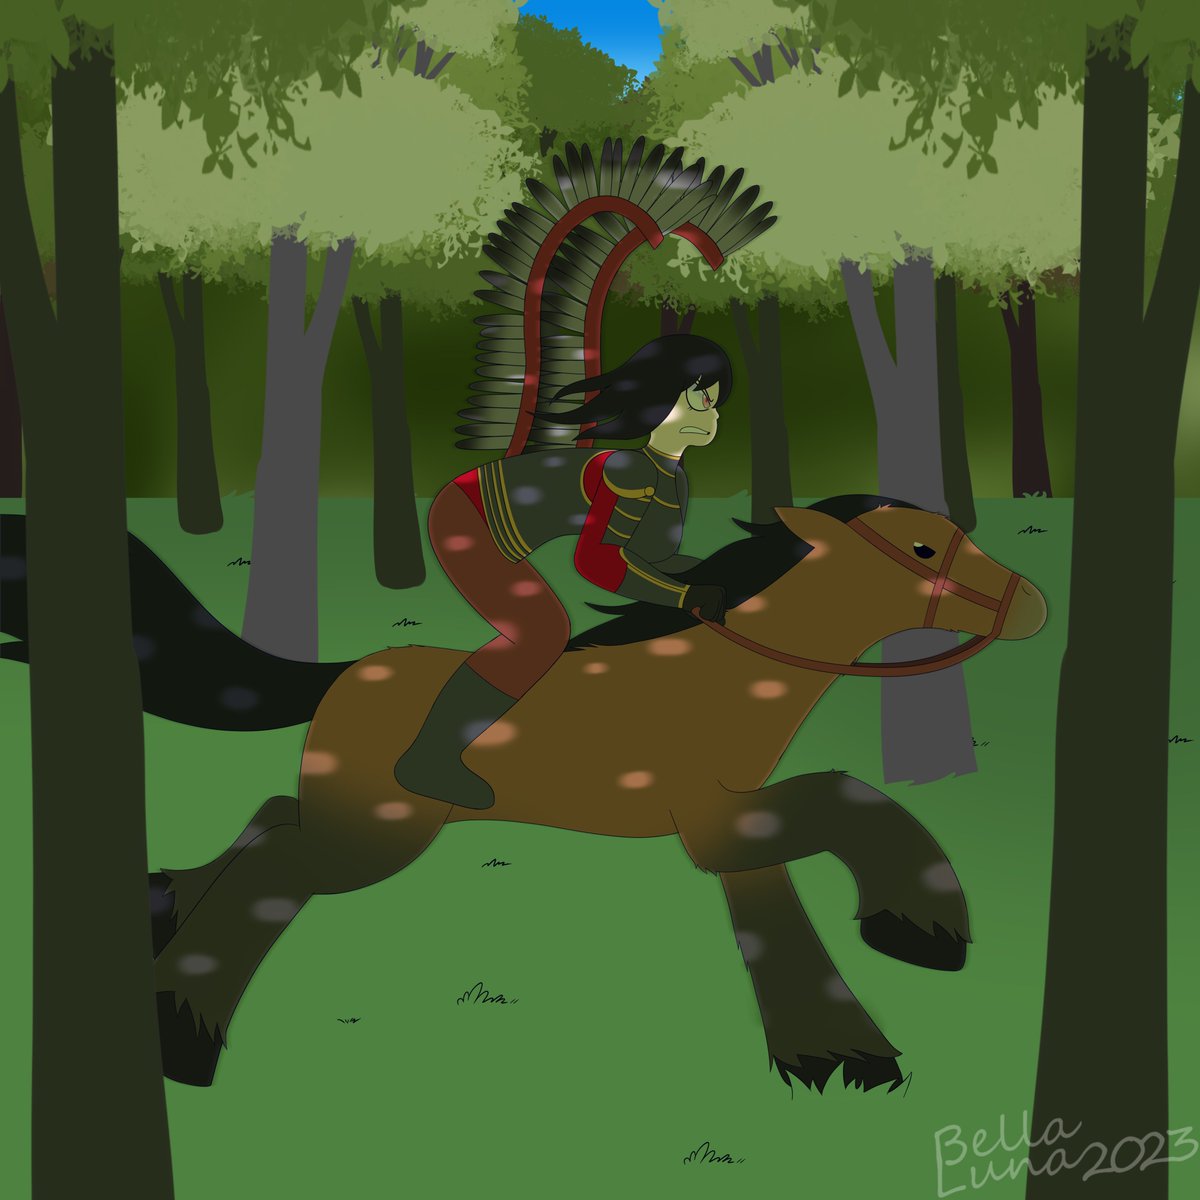 Alternate history for a cursed world and got to experiment with animals and shading!

#art #ArtistOnTwitter #artistsontwitter #artist #digitalart #DigitalArtist #FYP #fypシ #smallartist #fanart #EU4 #EuropaUniversalis4 #EuropaUniversalis